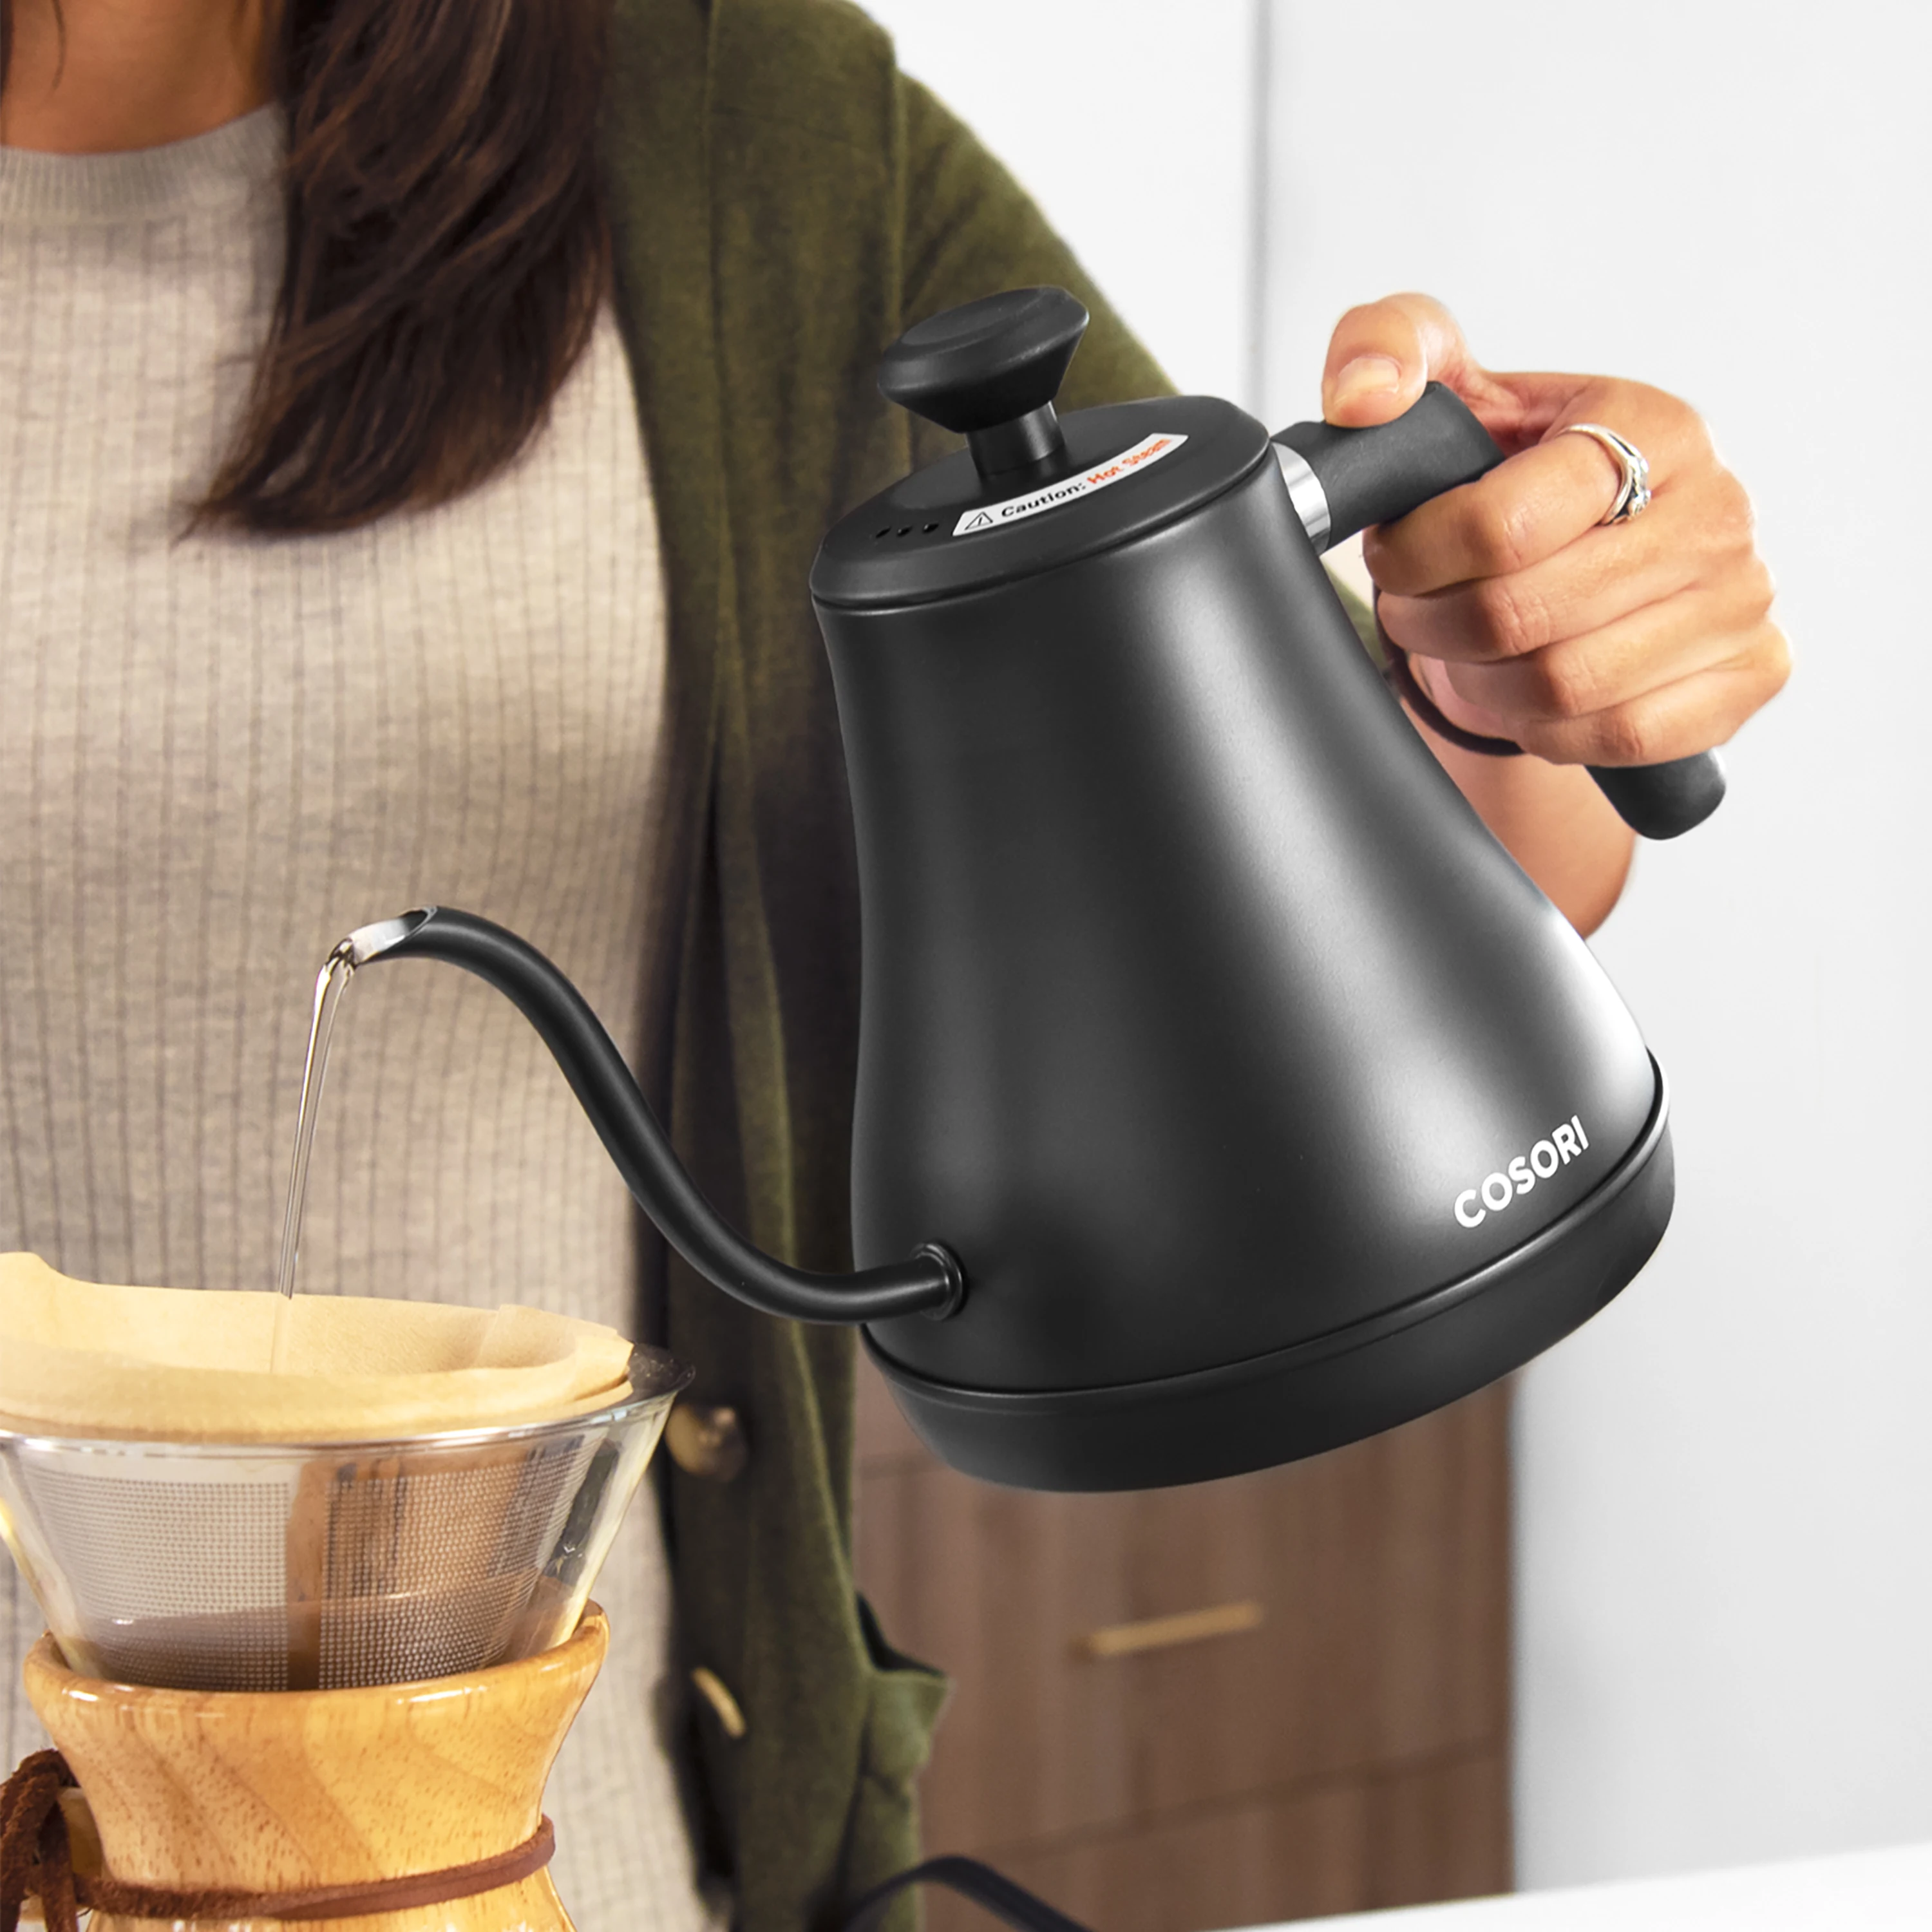 https://ae01.alicdn.com/kf/Sb72cbbbbd2344f318faecf1aafc0d8797/0-8L-Original-Electric-Gooseneck-Kettle-with-Coaster-Set-Black-with-5-Variable-Presets-Pour-Over.jpg